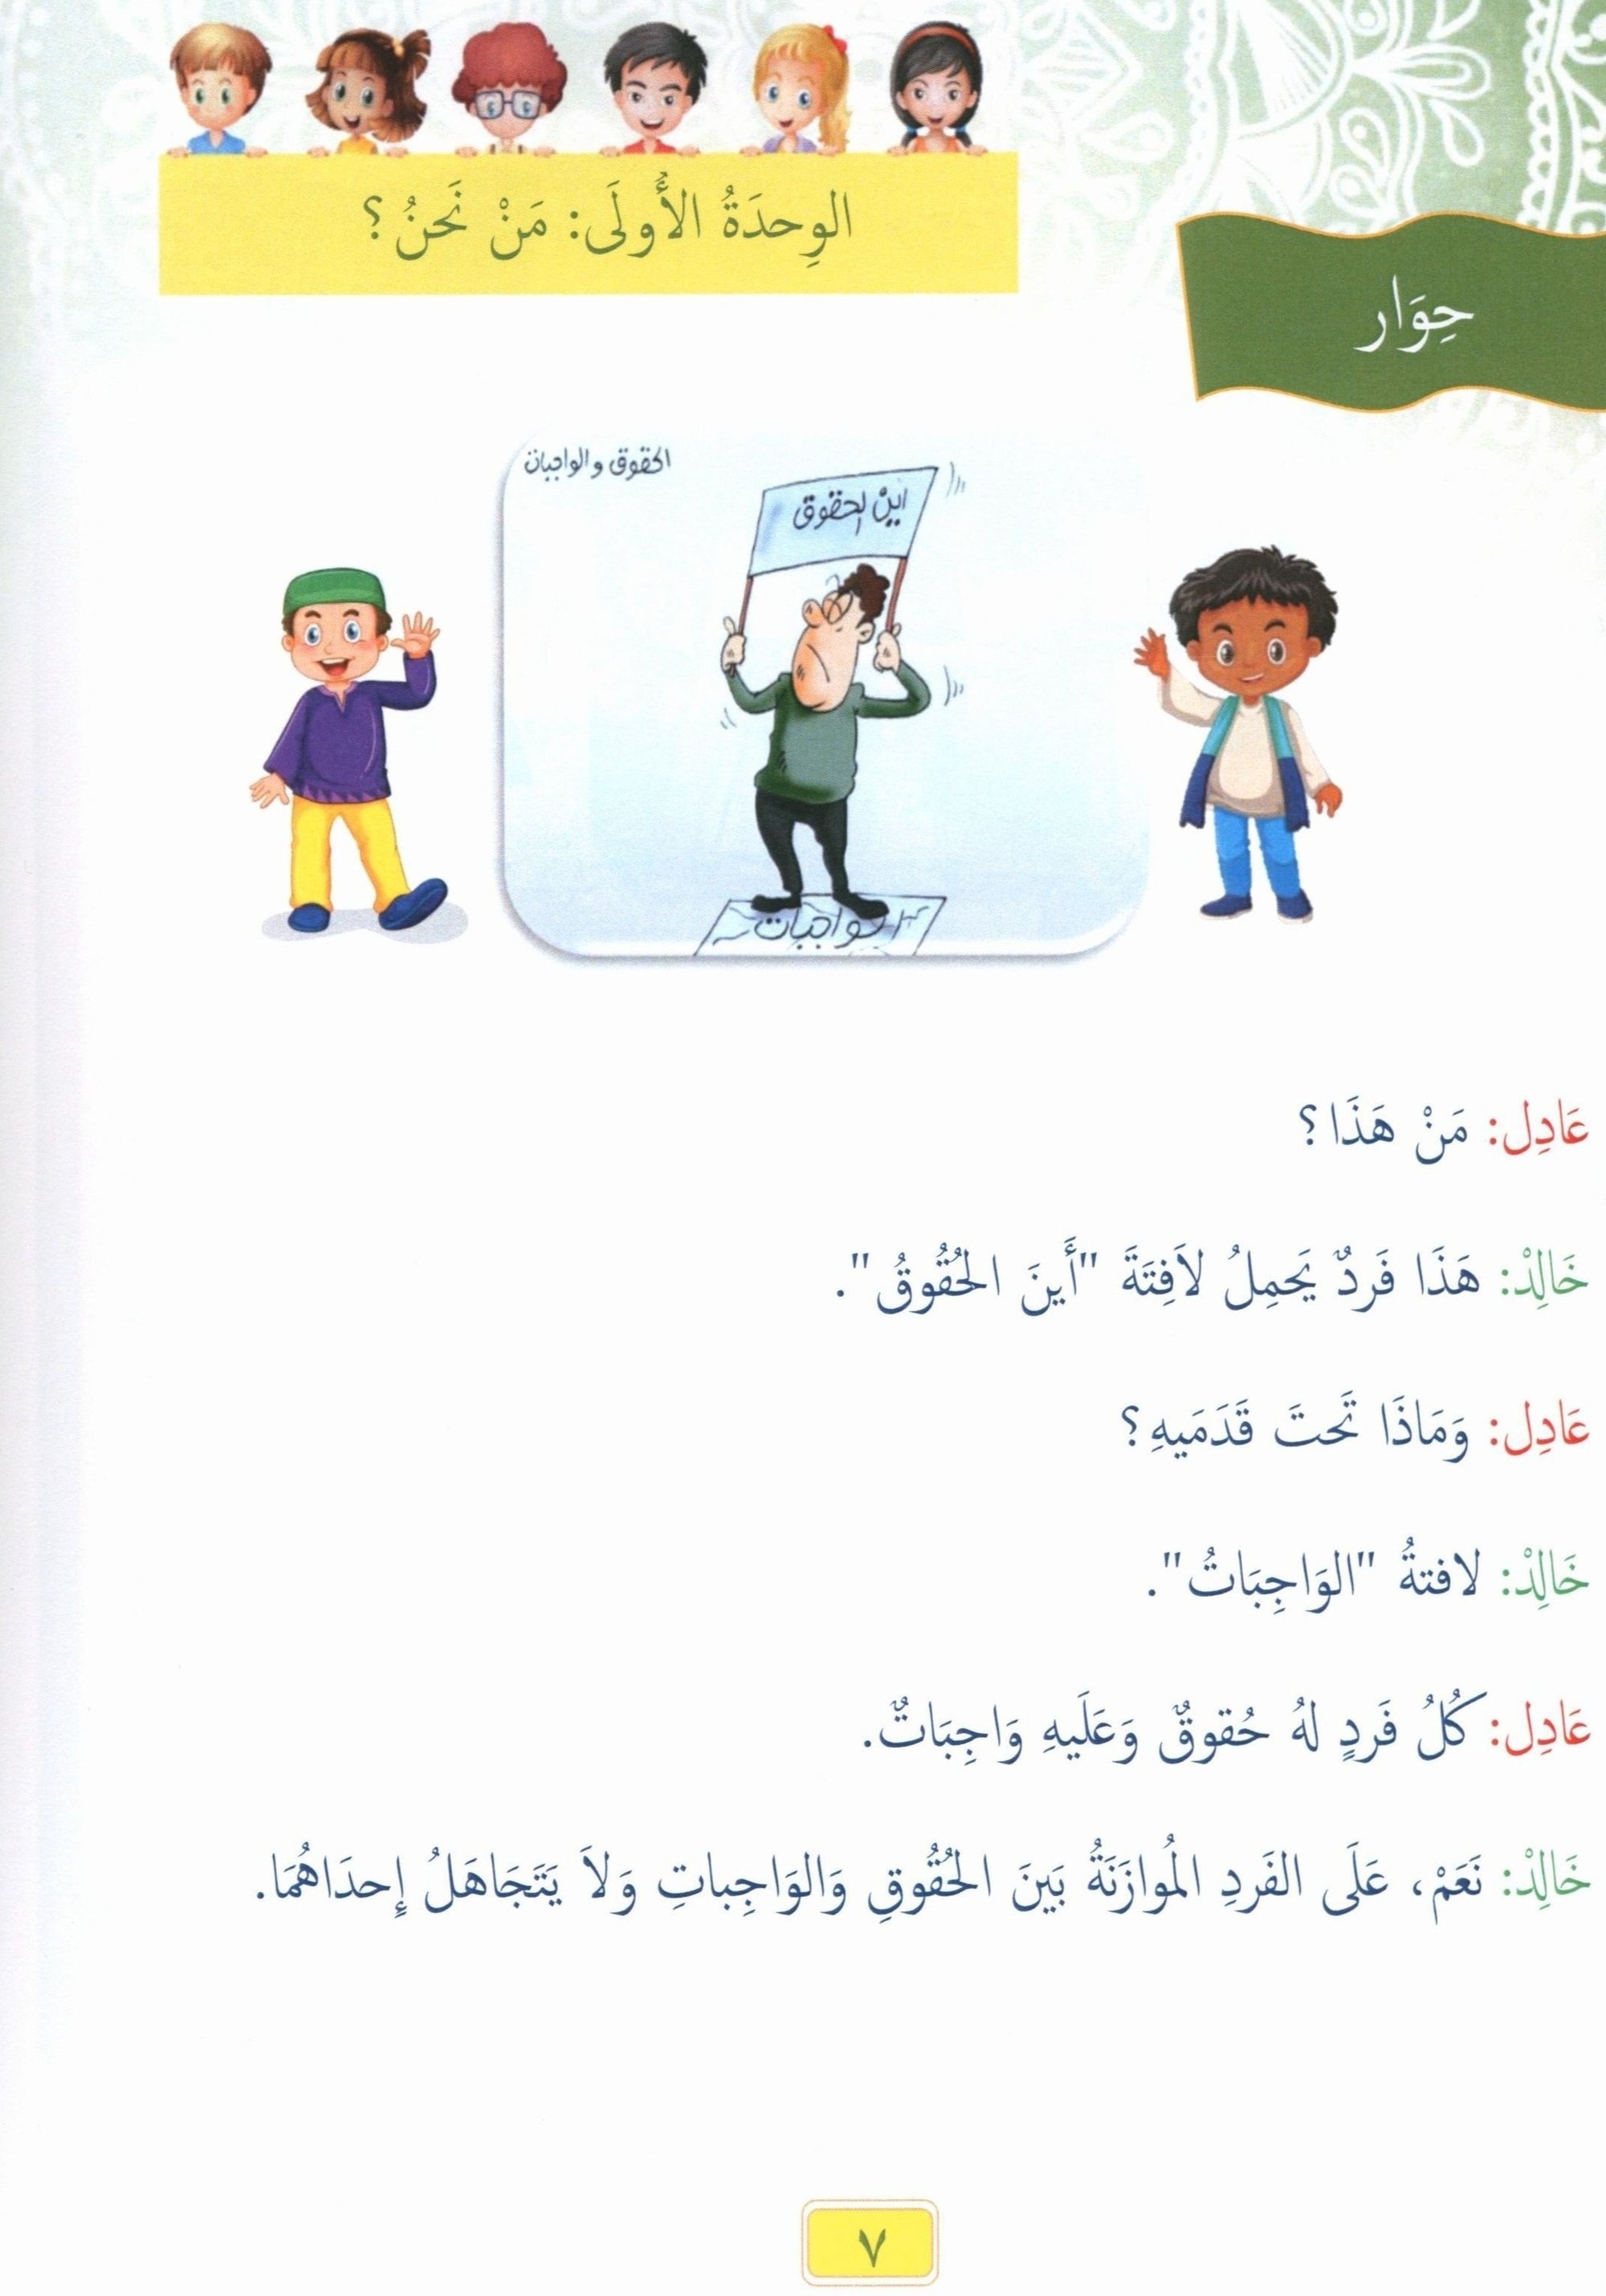 Our Language Is Our Pride Reading Level 4 لغتنا فخرنا